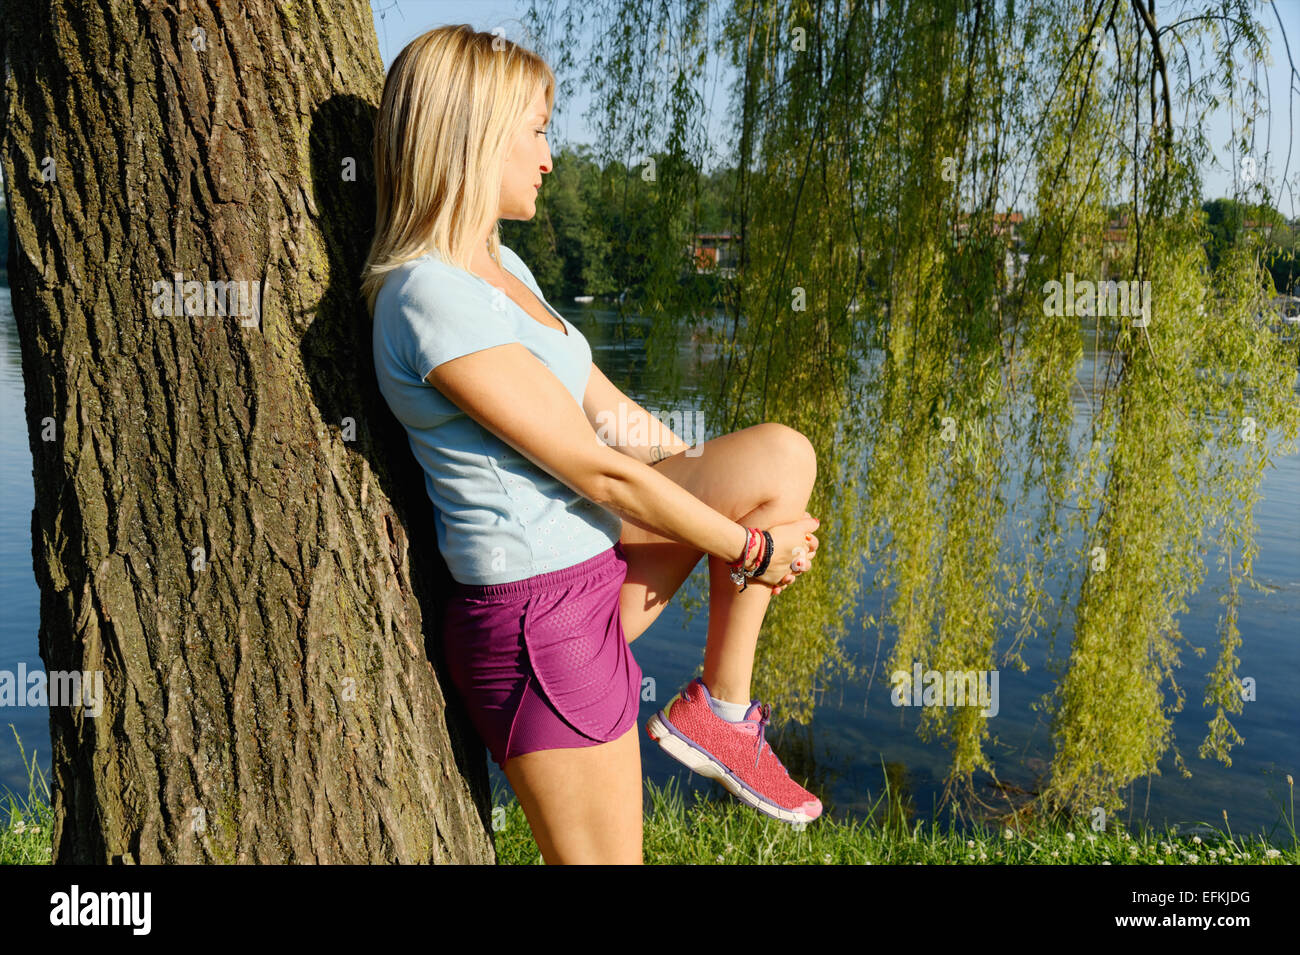 Mid adult woman stretching against tree Stock Photo